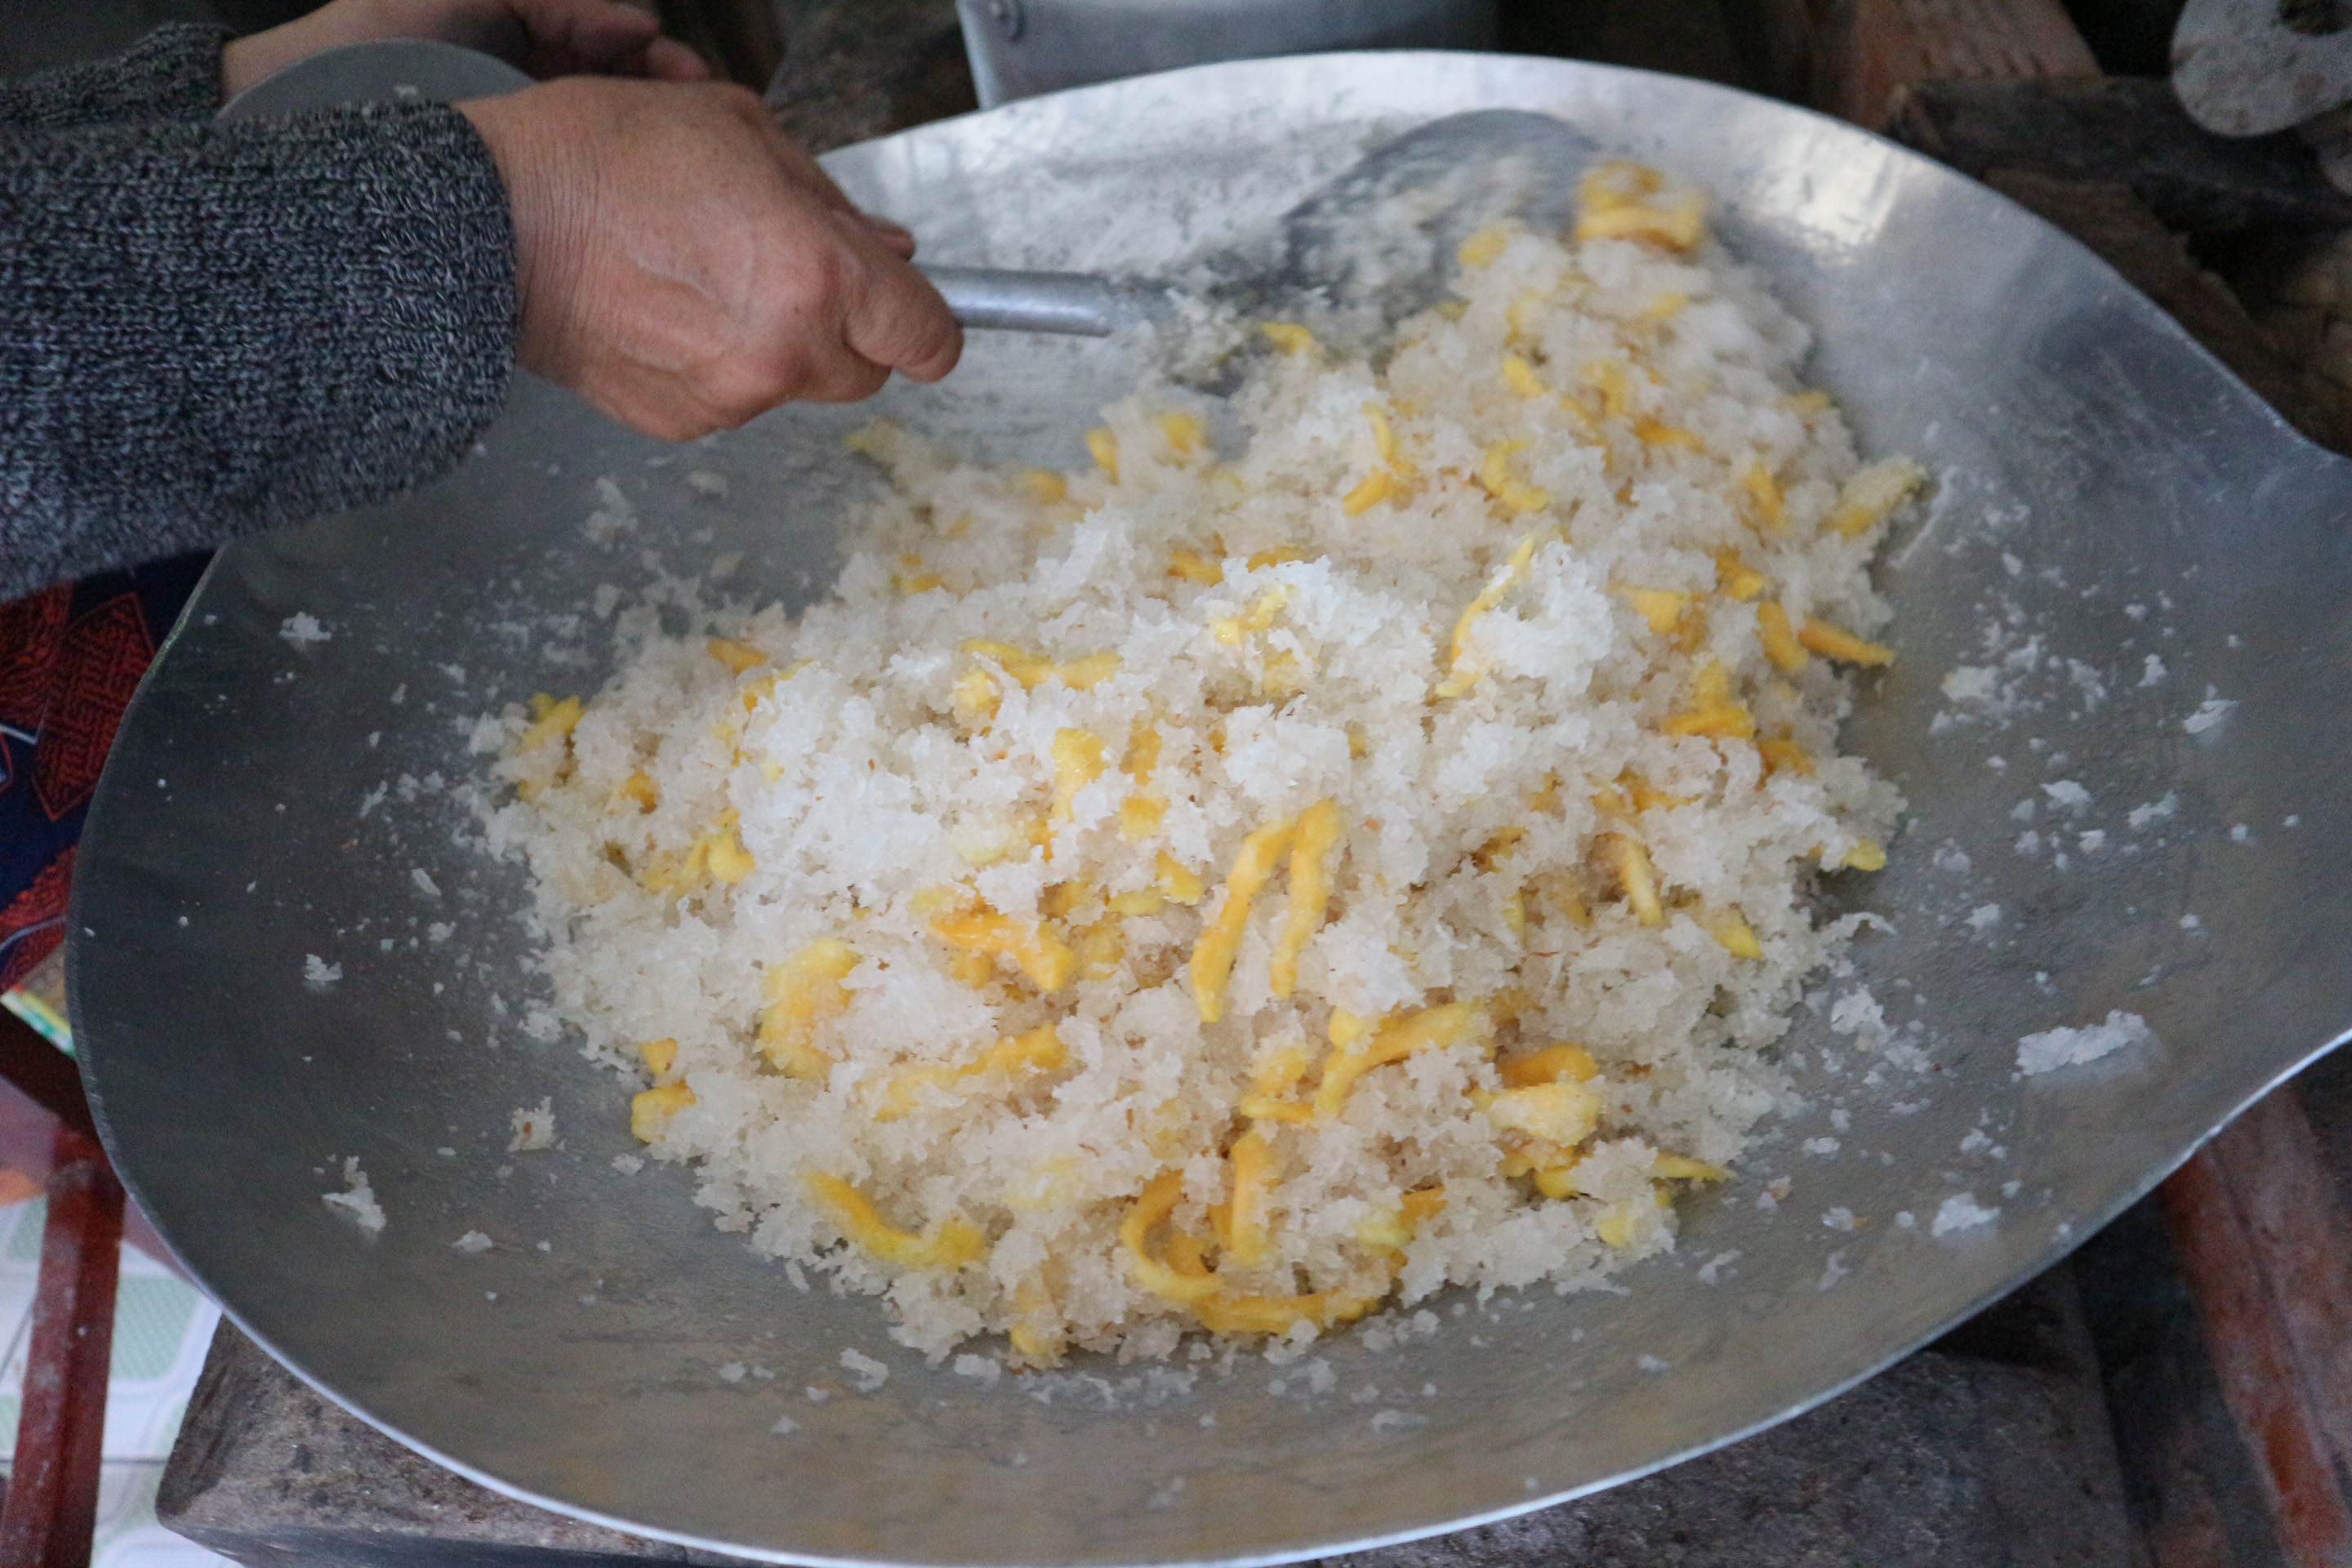 Coconut shreds are stir fried with jackfruit to make the filling for 'banh it.' Photo: Ngoc Phuong / Tuoi Tre News